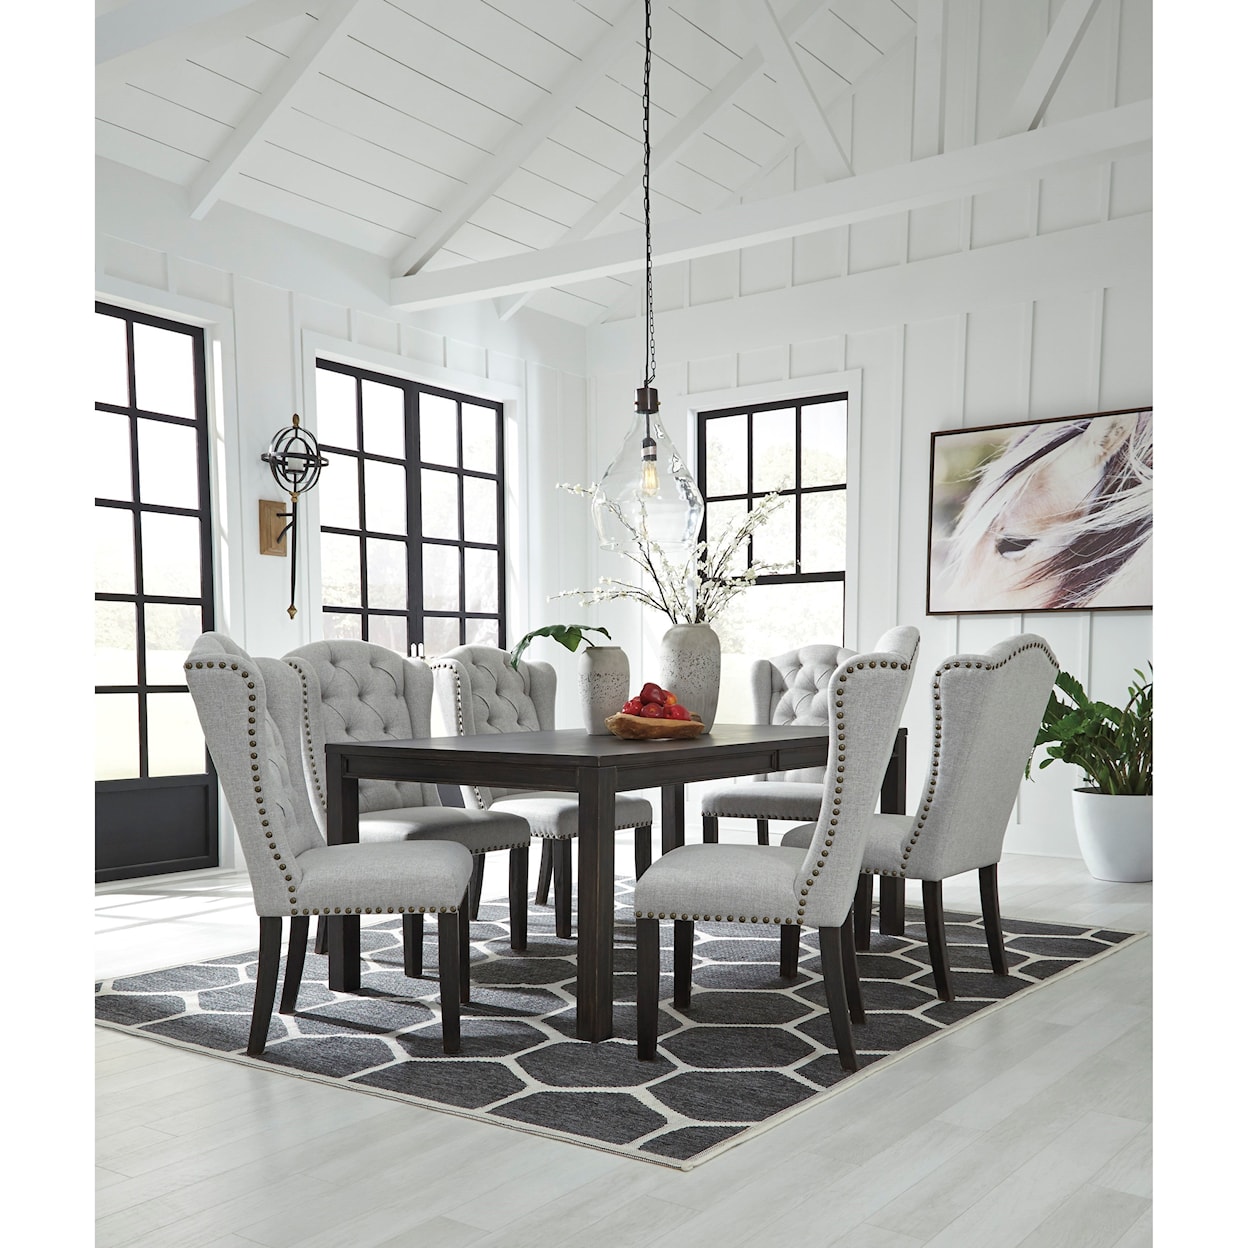 Benchcraft Jeanette 7-Piece Dining Set